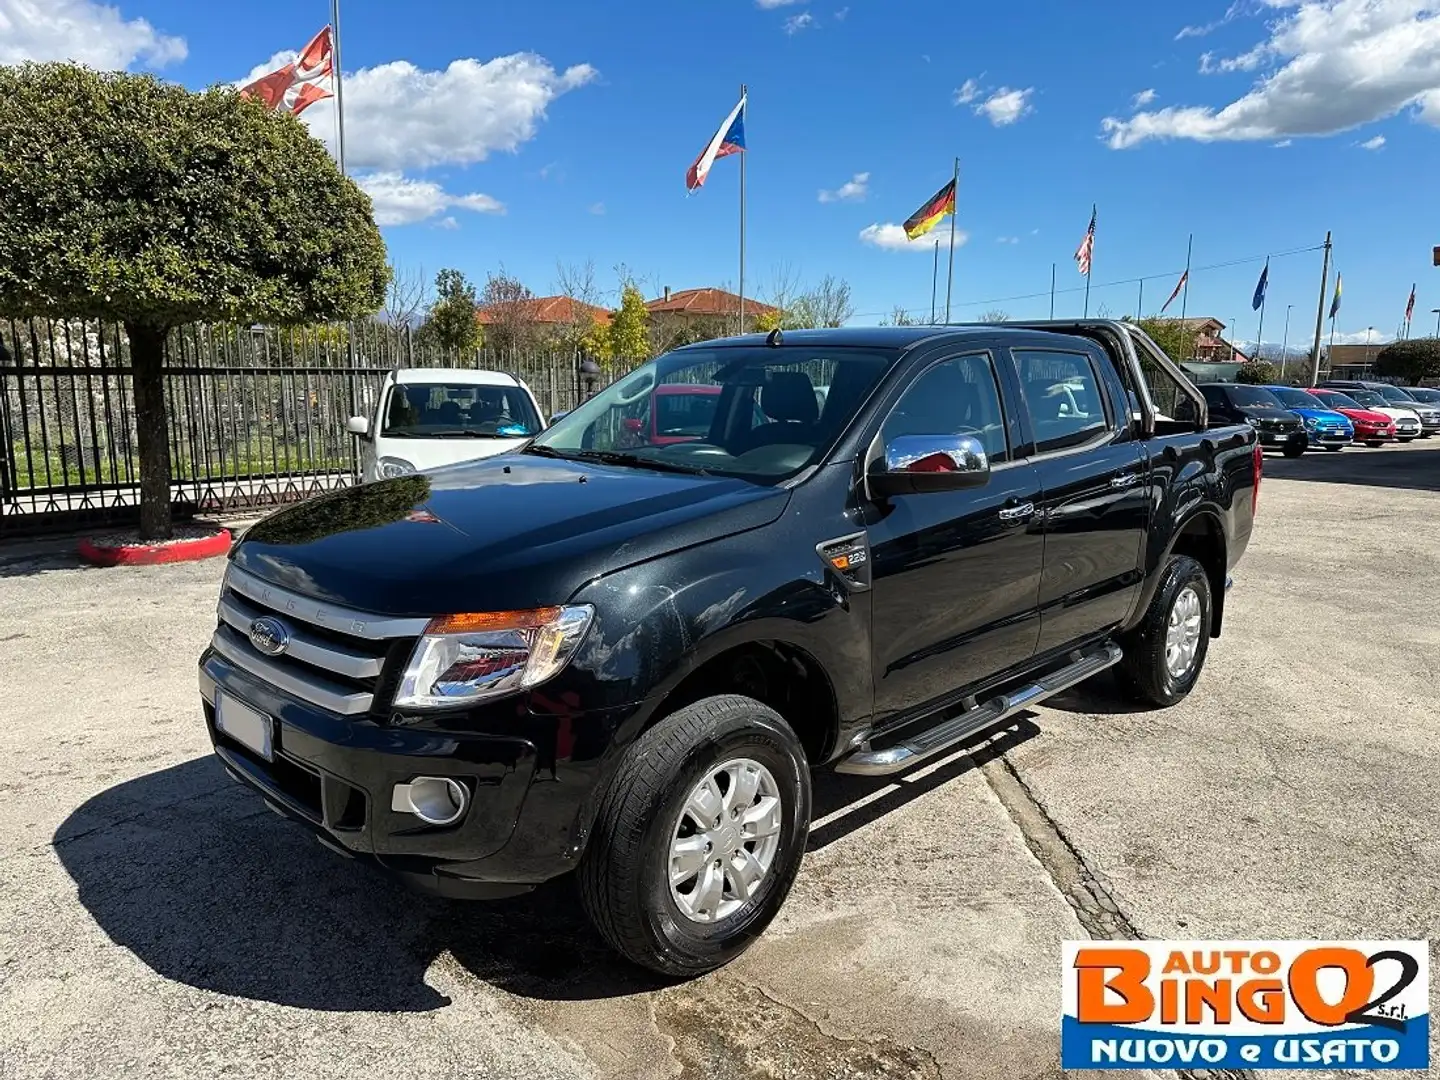 Ford Ranger Ranger 2.2 tdci double cab Limited Negro - 1